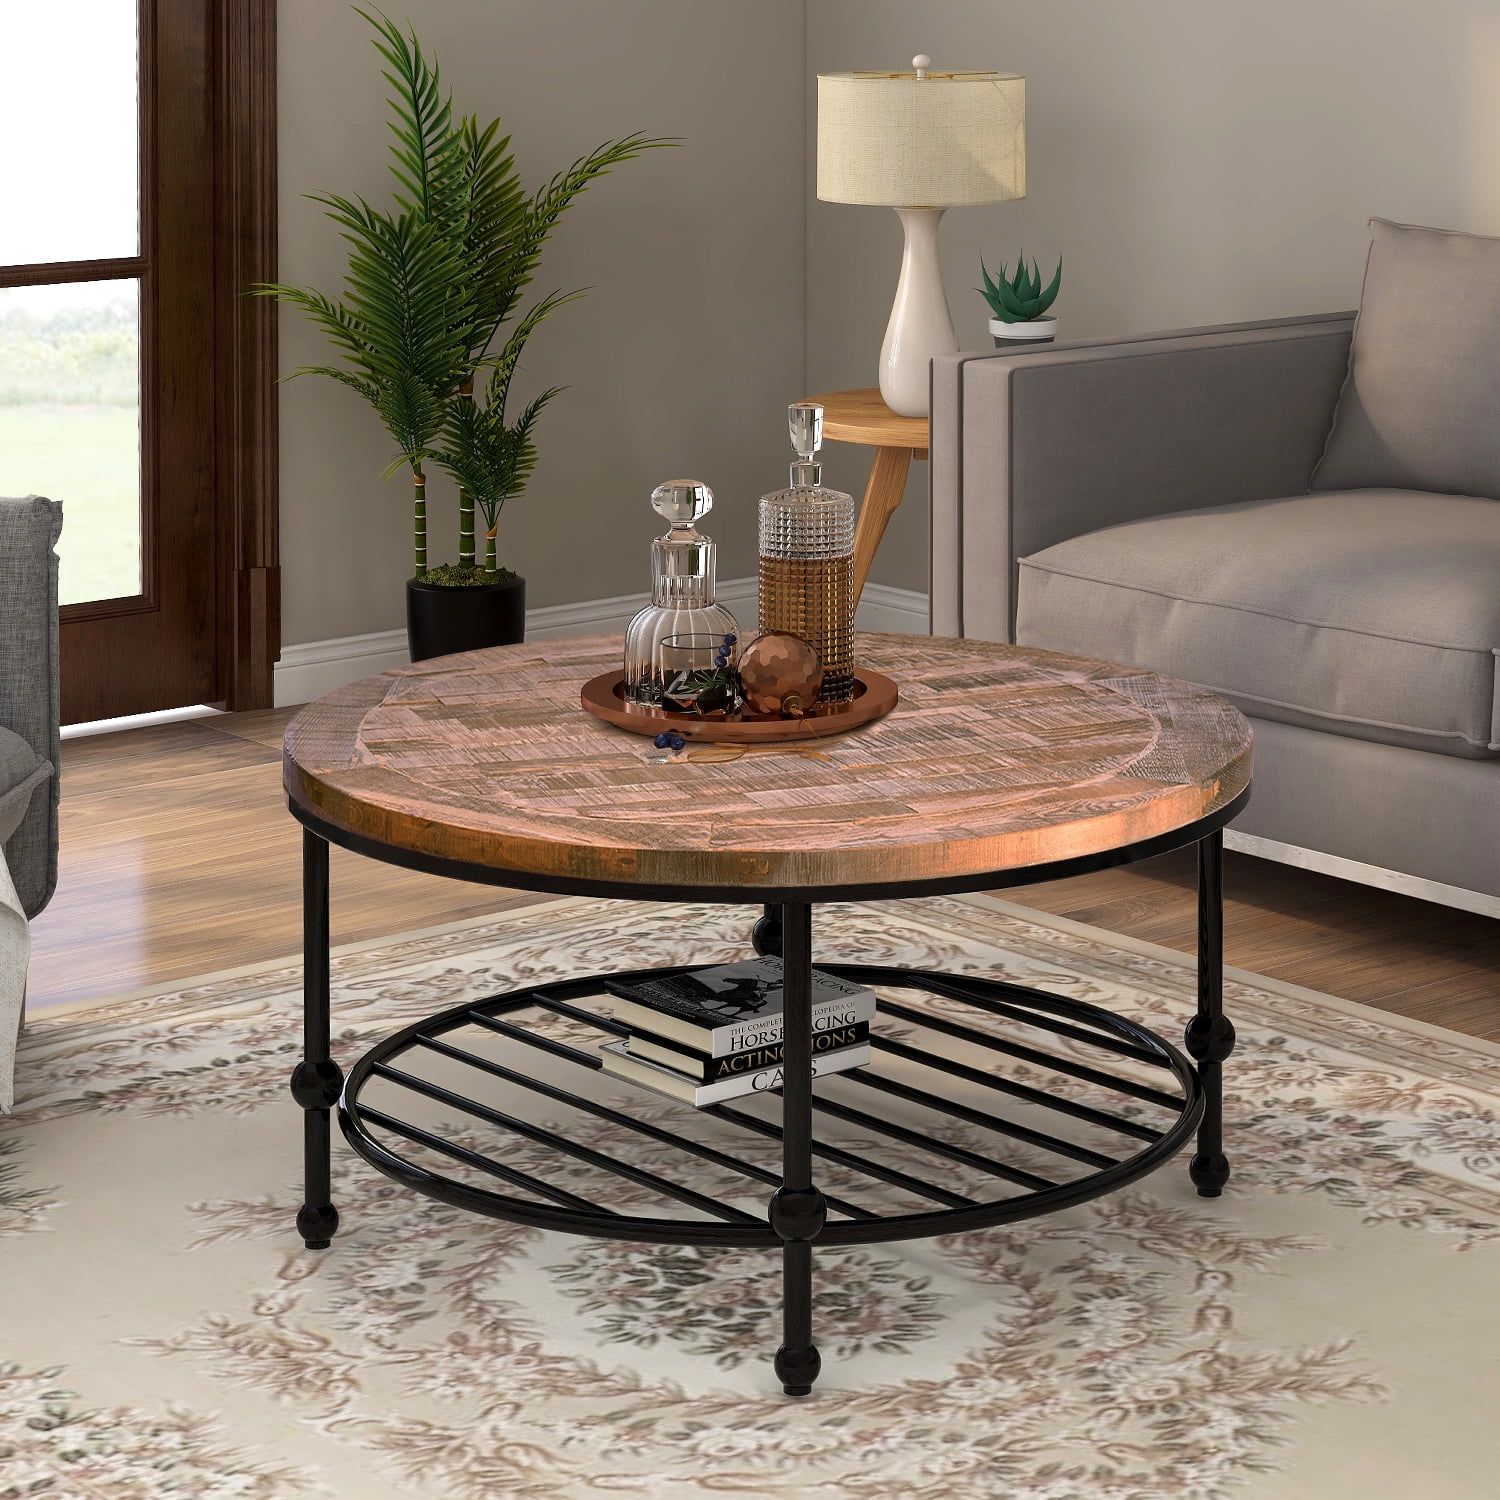 Rustic Natural Round Coffee Table With Storage Shelf For Living Room For Round Coffee Tables (Gallery 7 of 20)